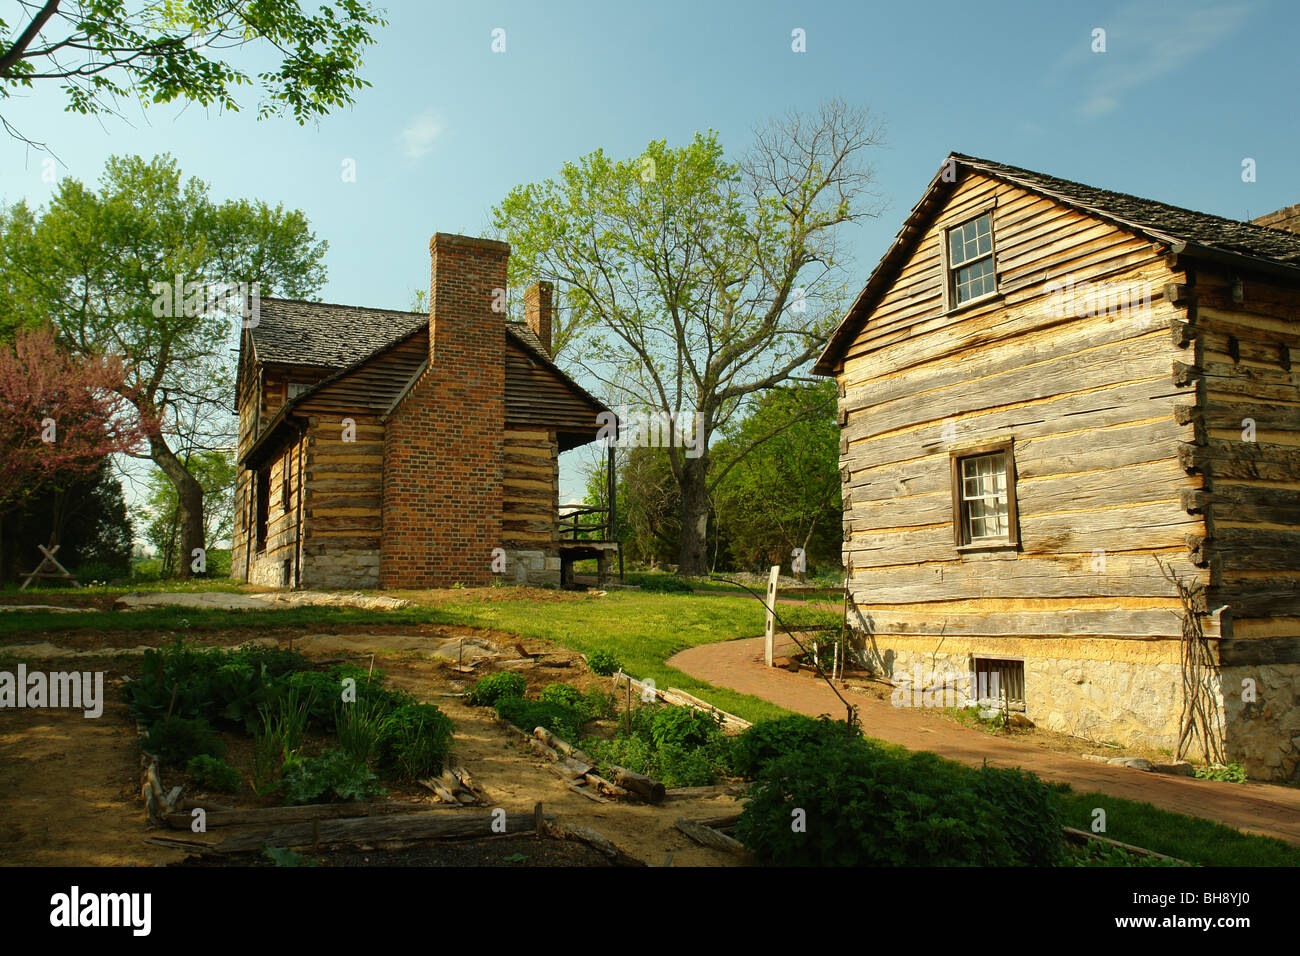 AJD64405, Piney Flats, TN, Tennessee, Rocky Mount State Historic Museum, house Stock Photo